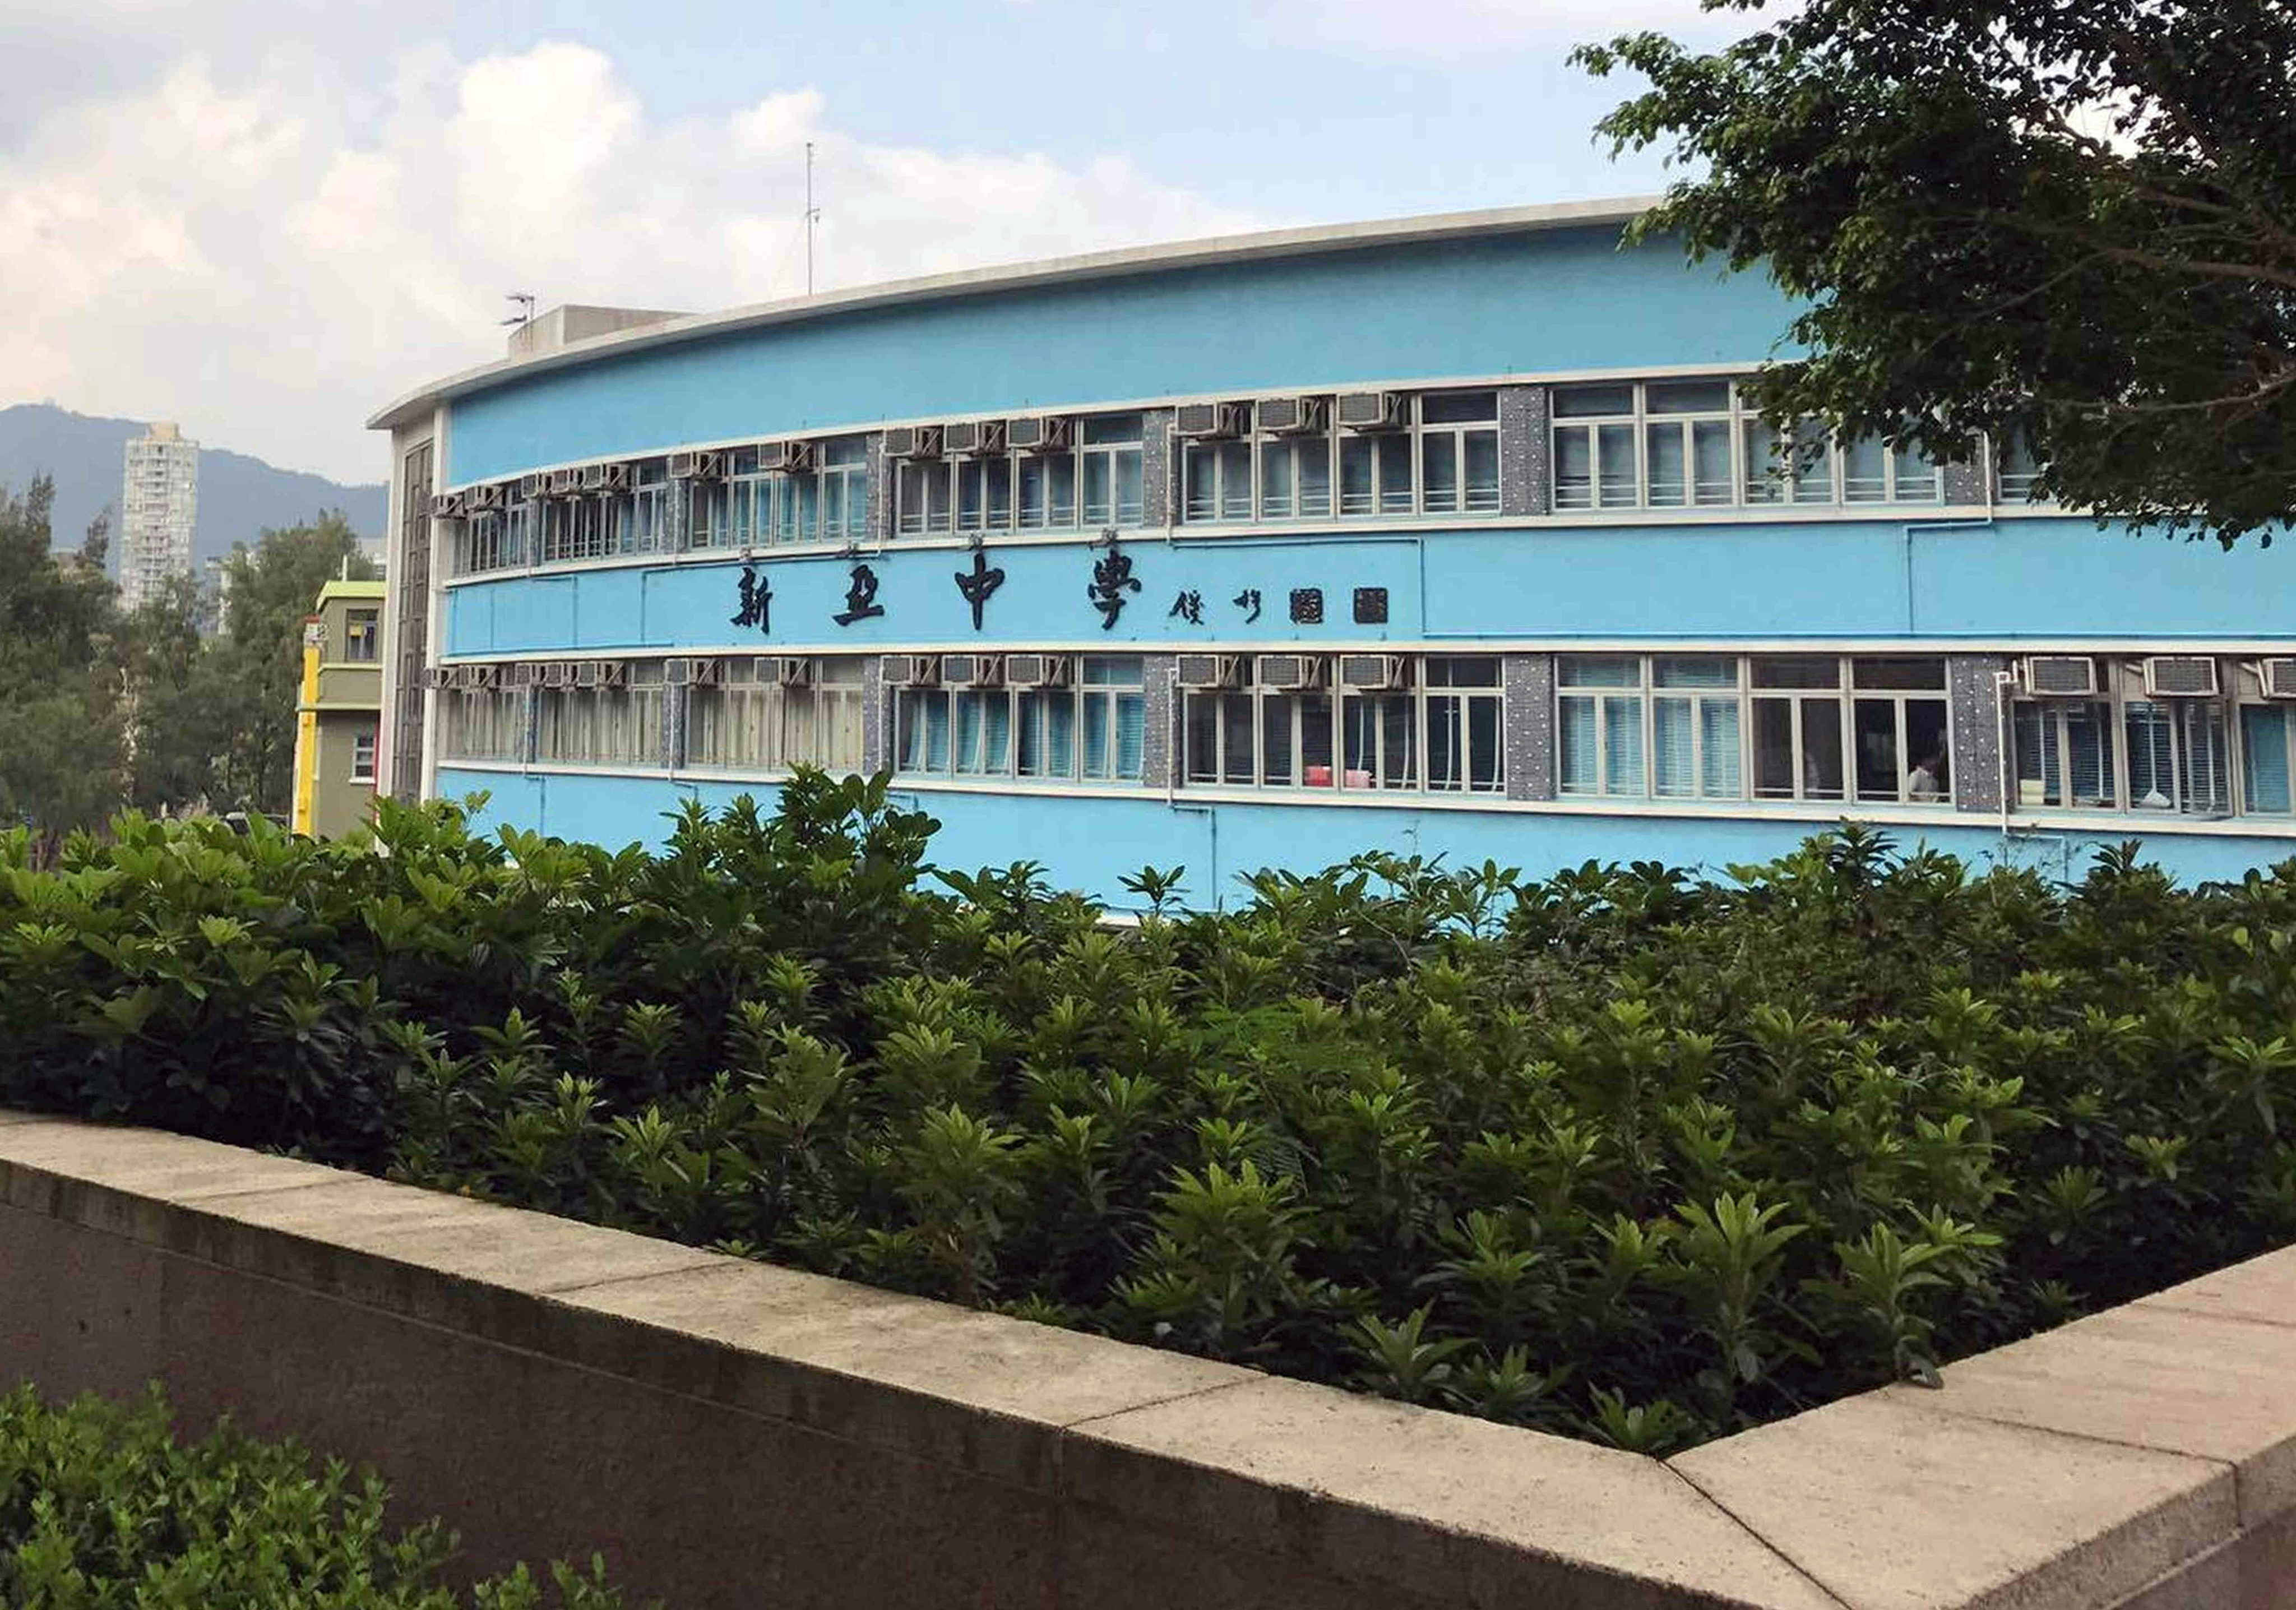 Eleven students fell sick at New Asia Middle School in To Kwa Wan after suspected gas leak. Photo: New Asia Middle School.